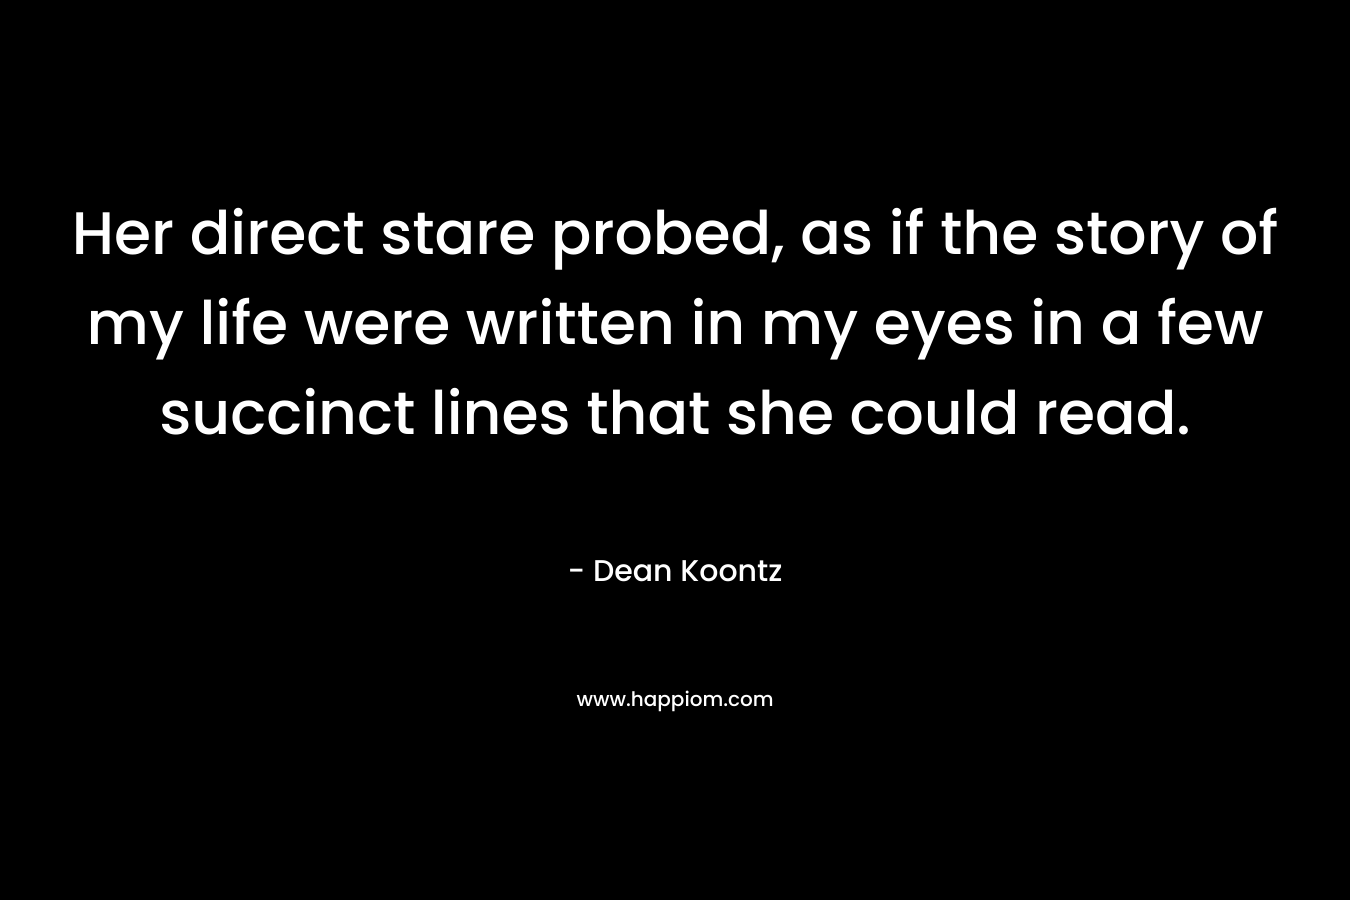 Her direct stare probed, as if the story of my life were written in my eyes in a few succinct lines that she could read. – Dean Koontz